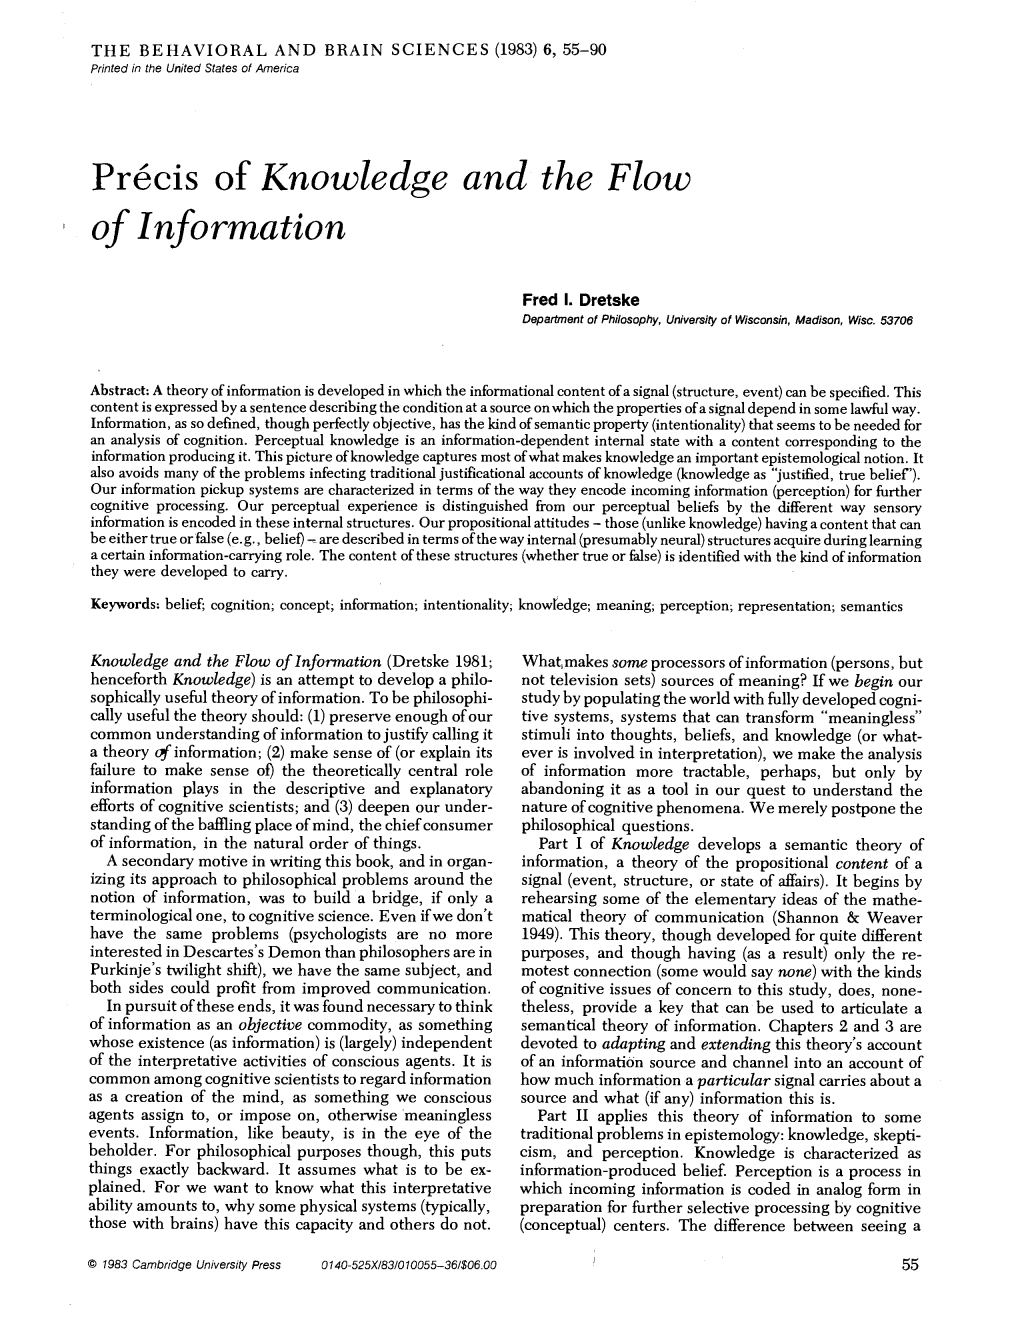 Précis of Knowledge and the Flow of Information